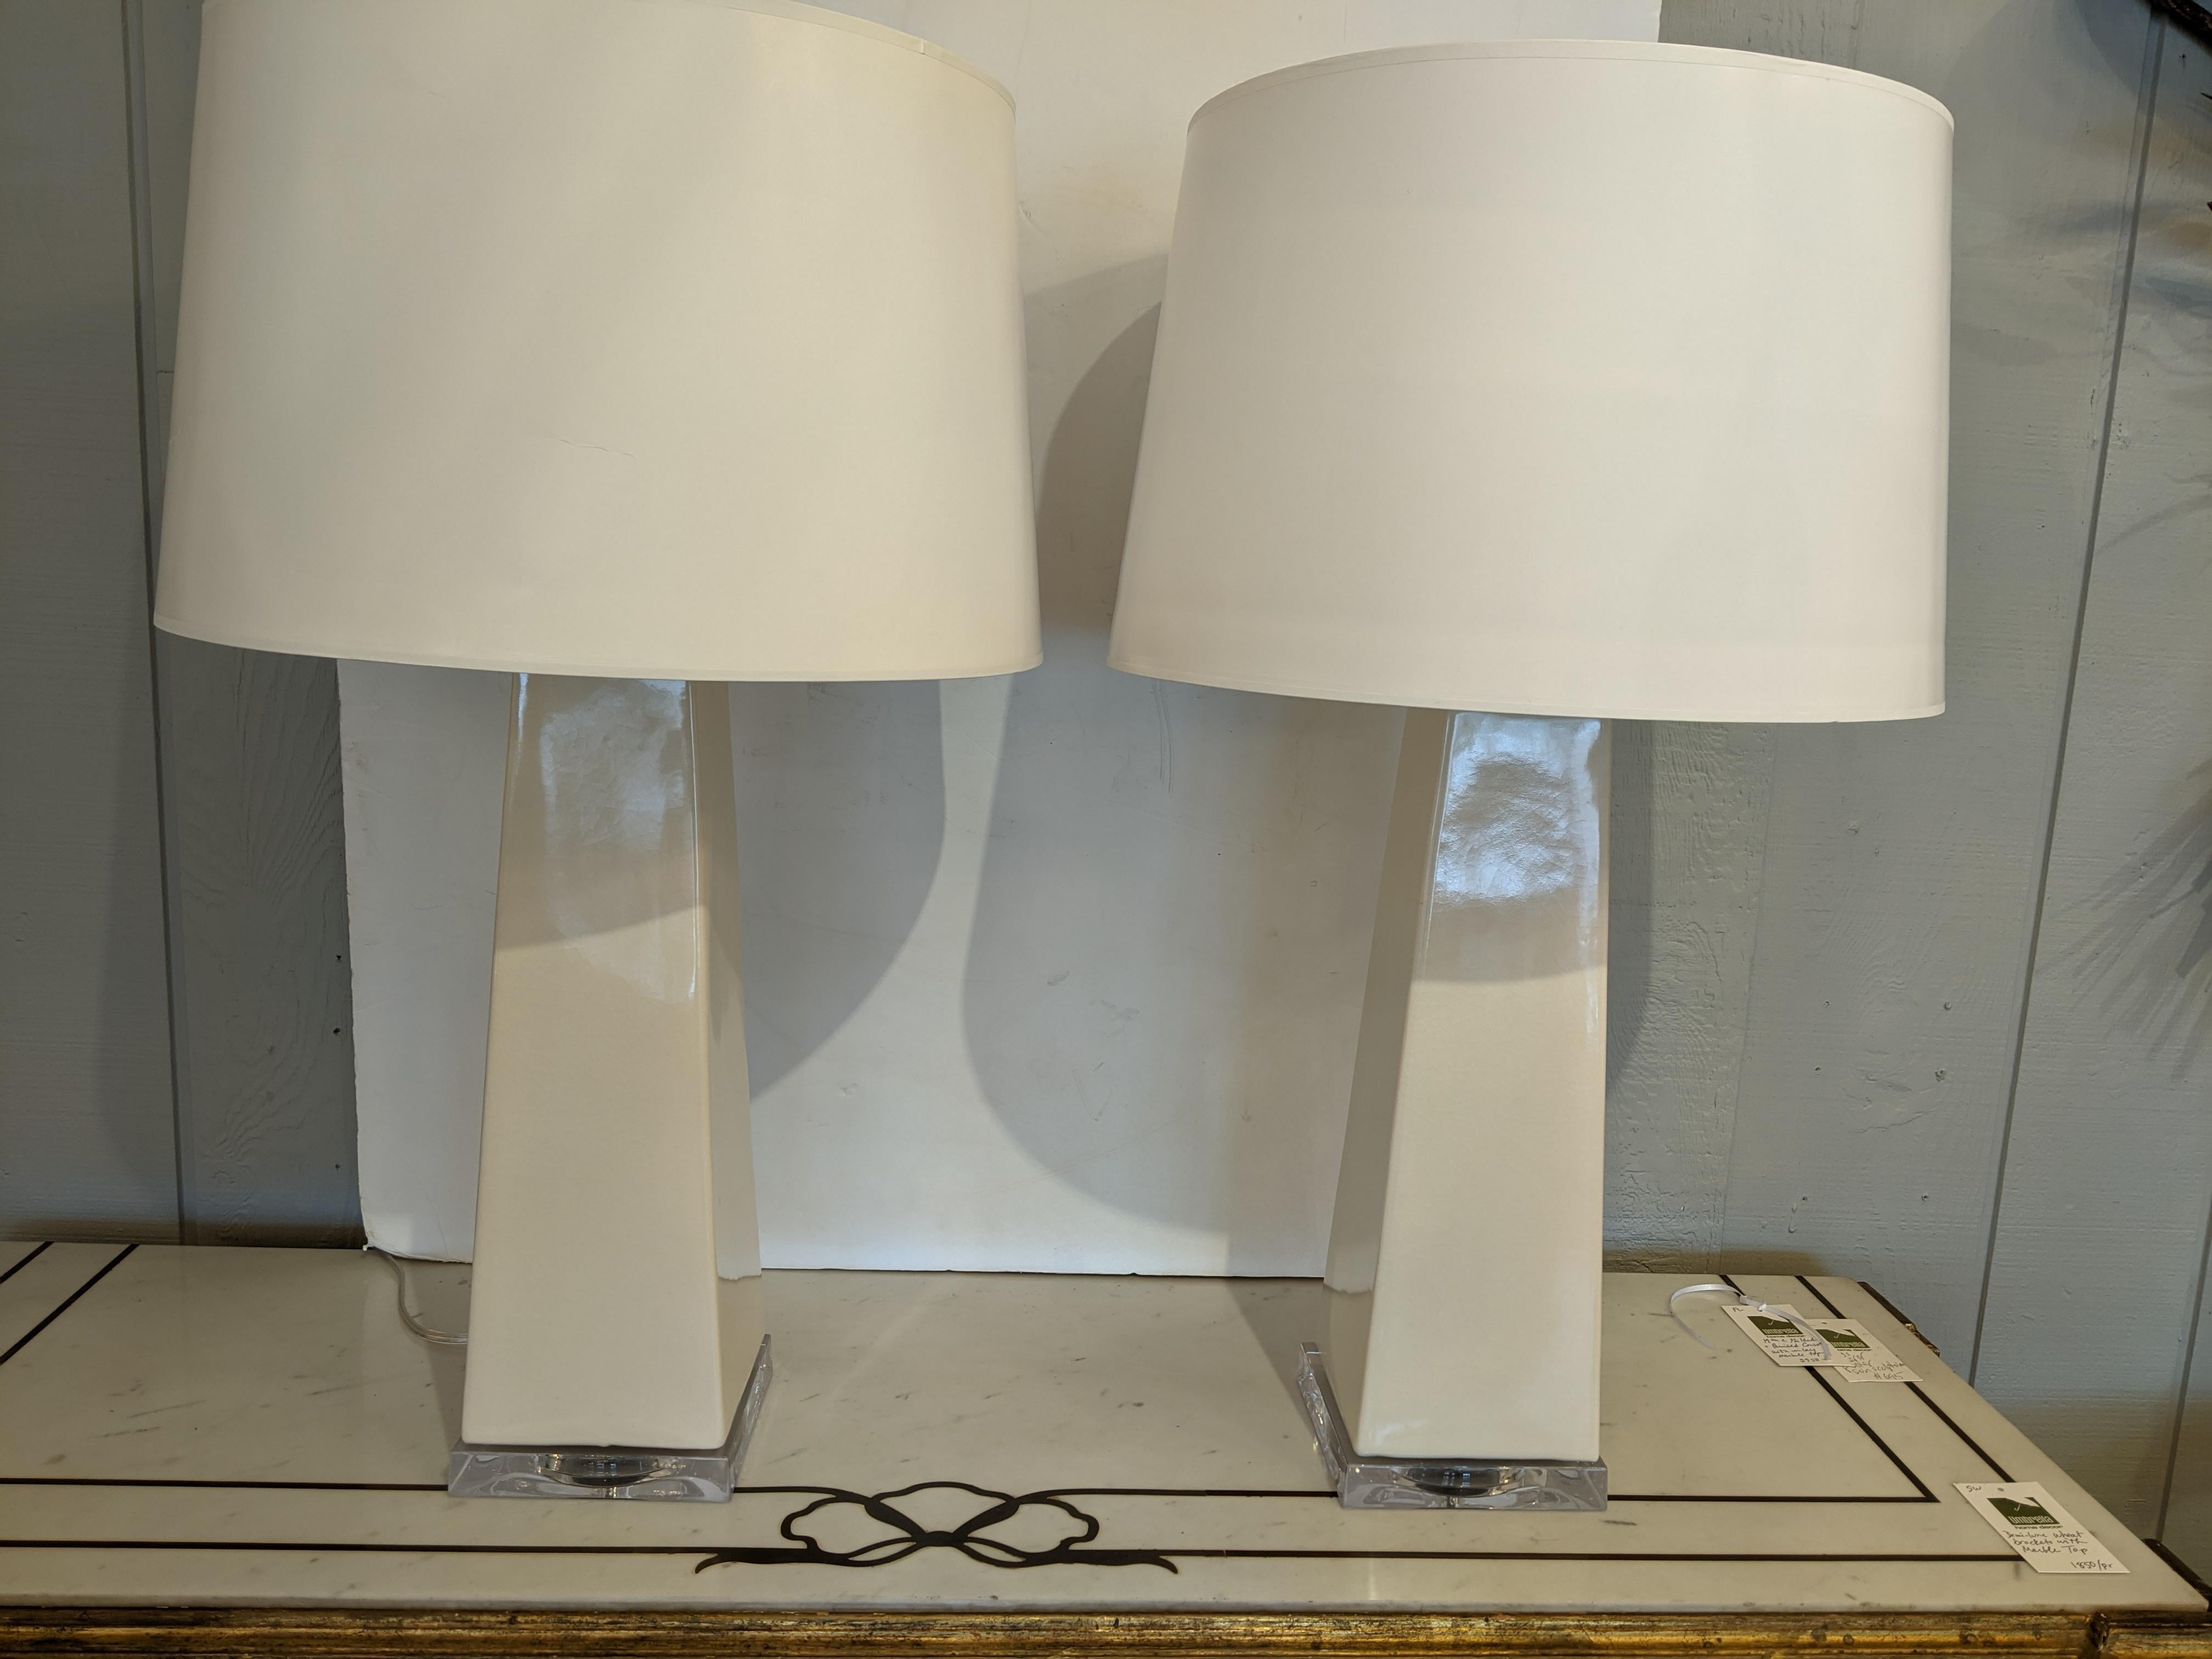 Statuesque pair of contemporary cream composition or ceramic glazed lamps on lucite bases. Includes shades.
6 x 6 base Shade is 14.5 diameter.